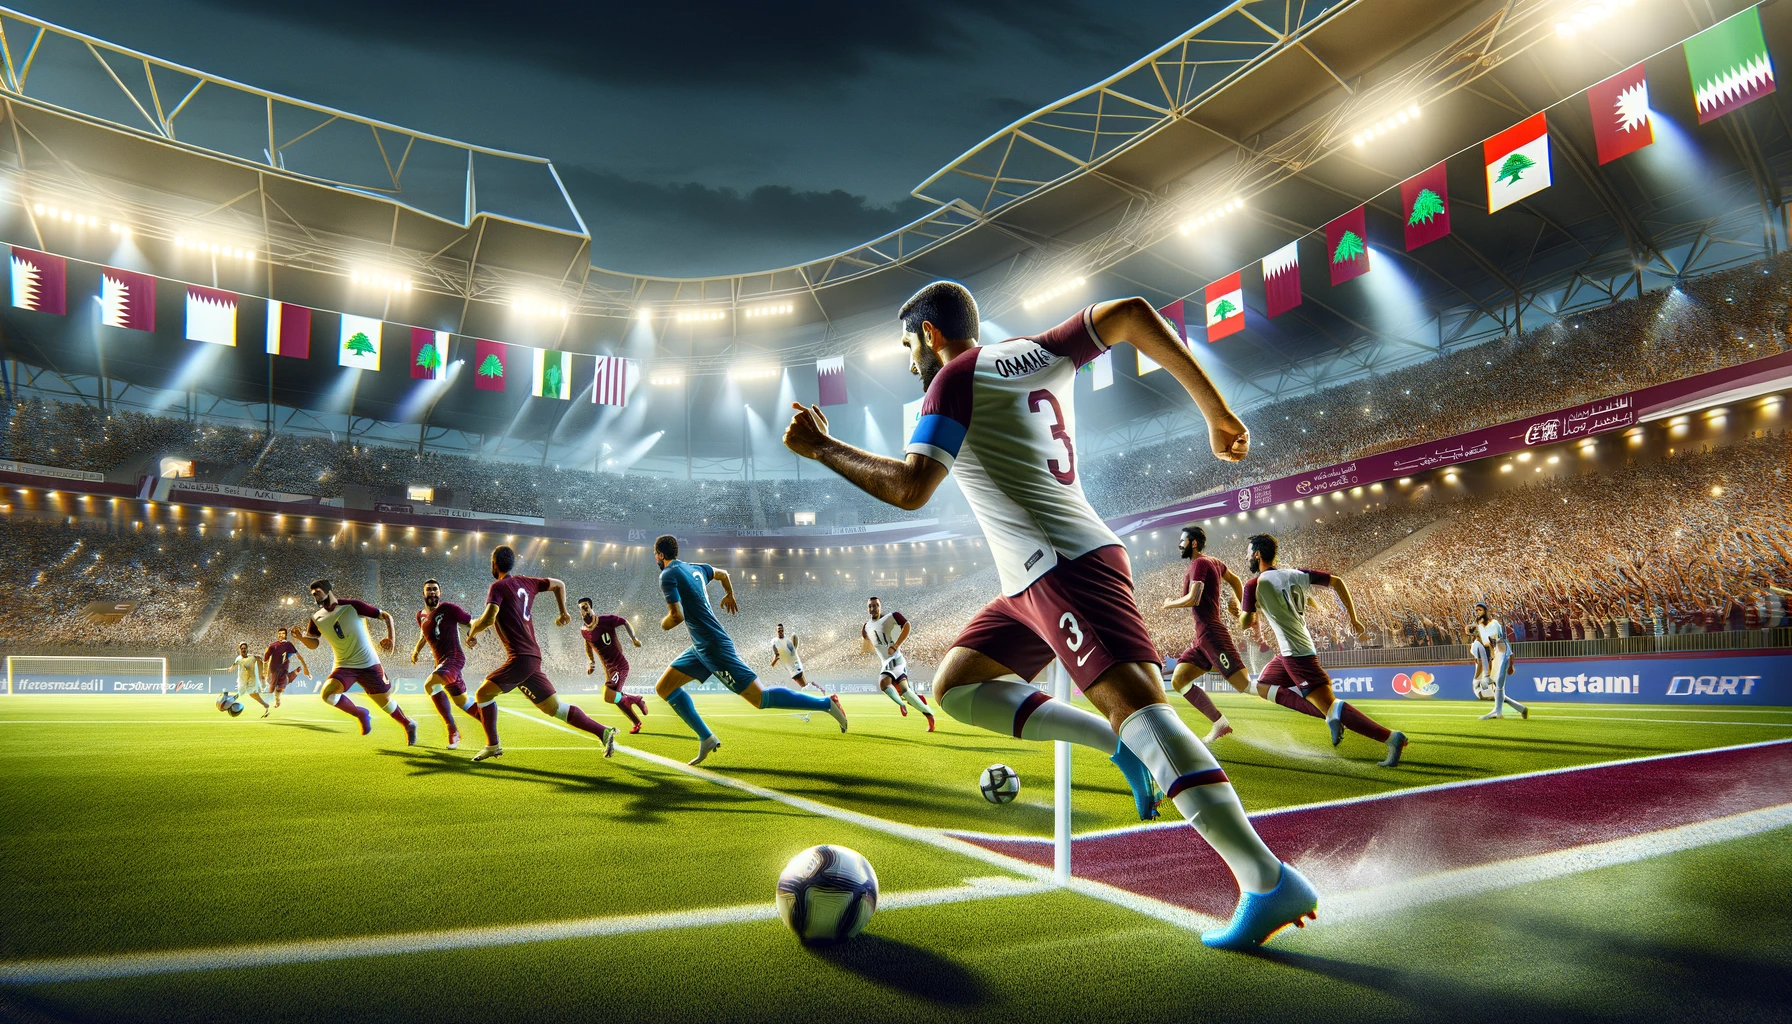 DALL·E 2024 01 14 16.07.34 A dynamic and exciting football match scene between Qatar and Lebanon at the Lusail Stadium showcasing players in action on the field. The stadium is